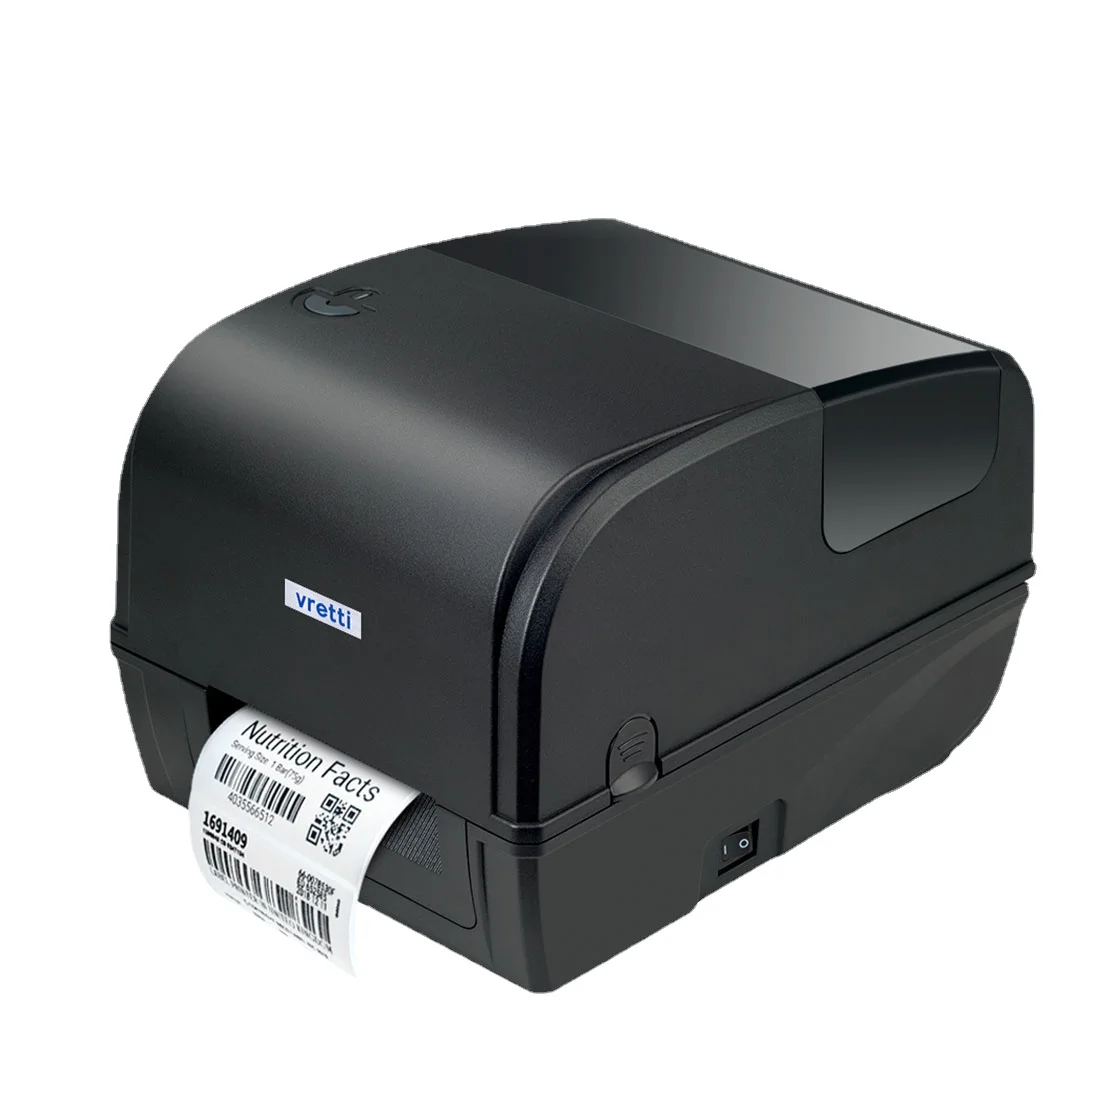 Industrial-grade 4-inch thermal transfer label printer has optional wireless connection. loading=lazy